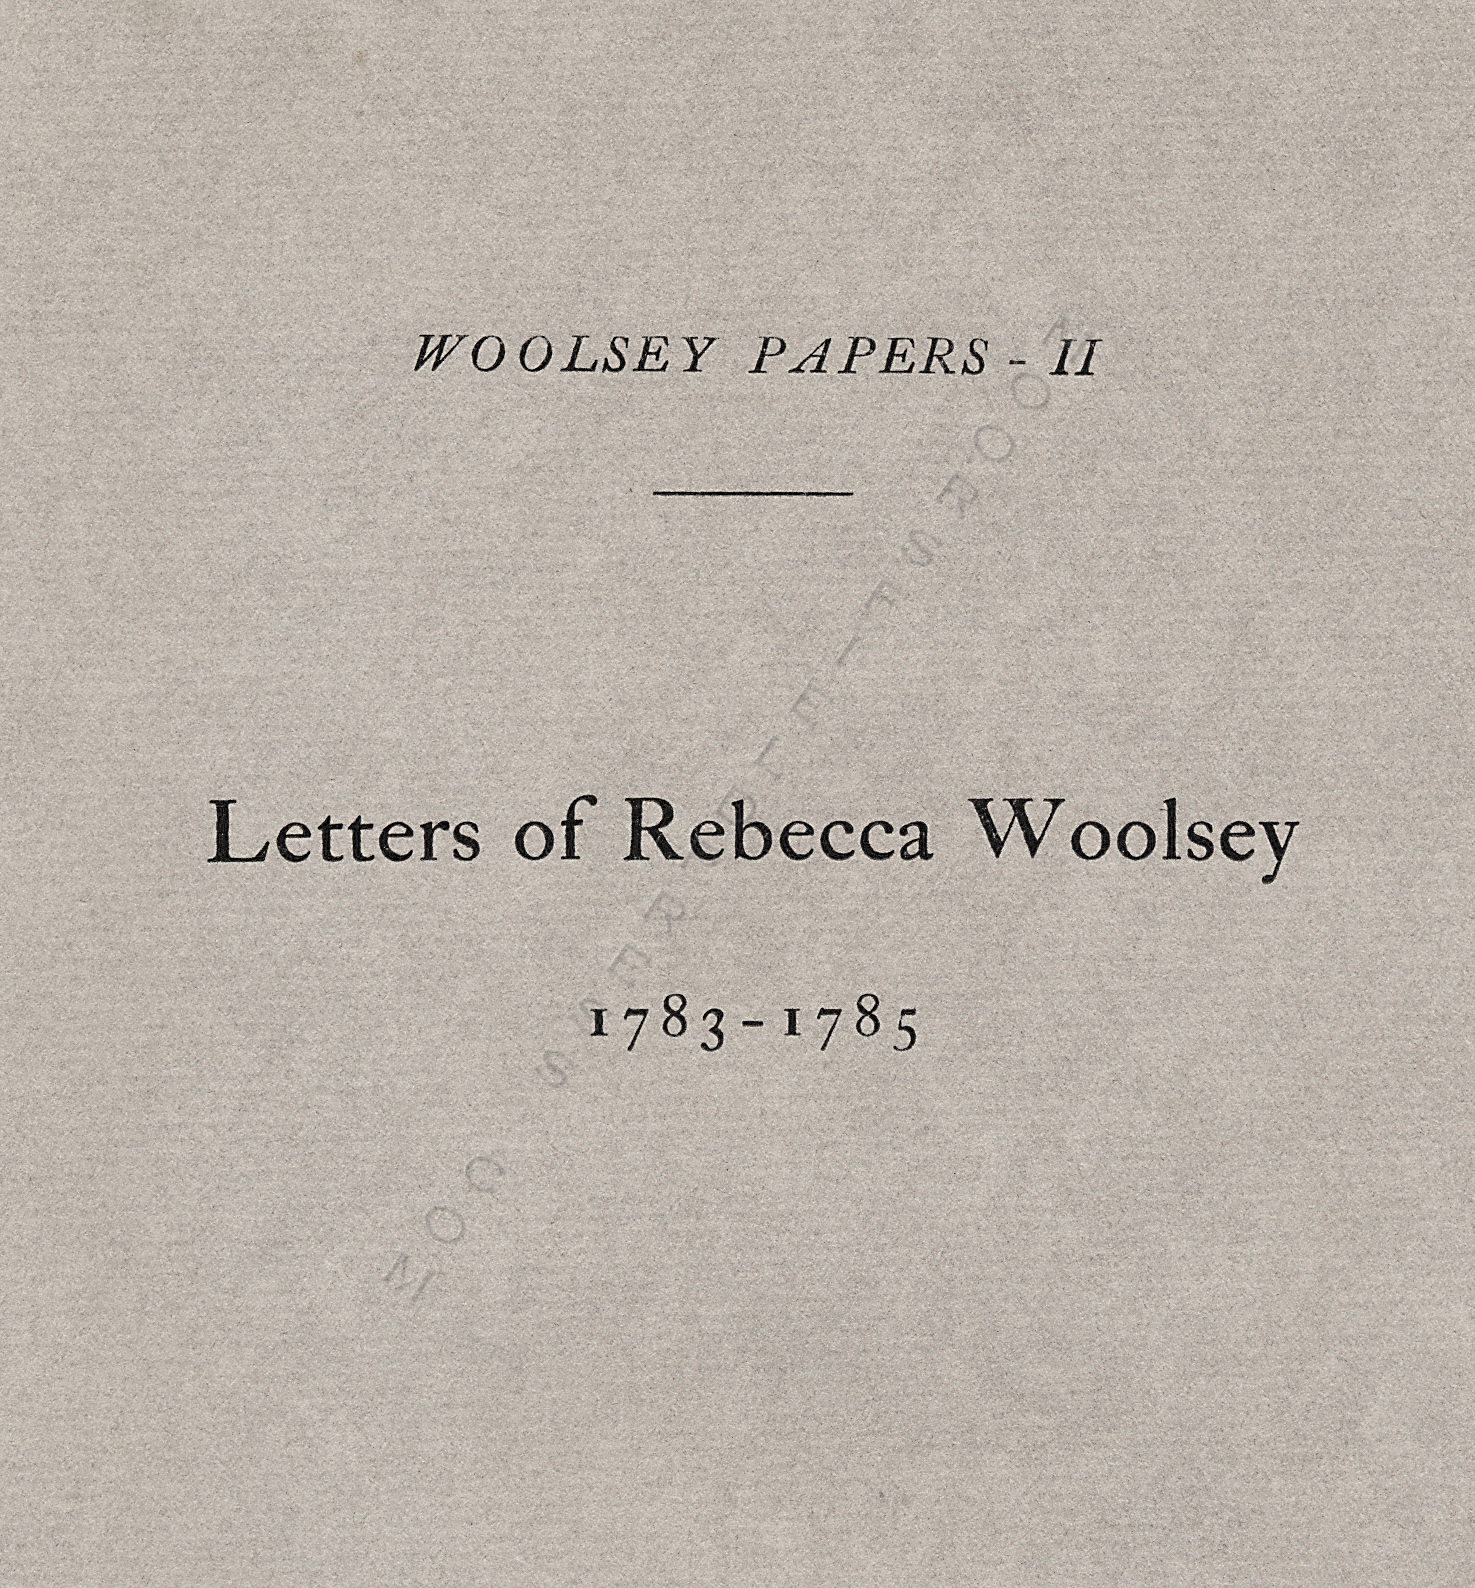 WOOLSEY PAPERS 2=LETTERS OF REBECCA WOOLSEY